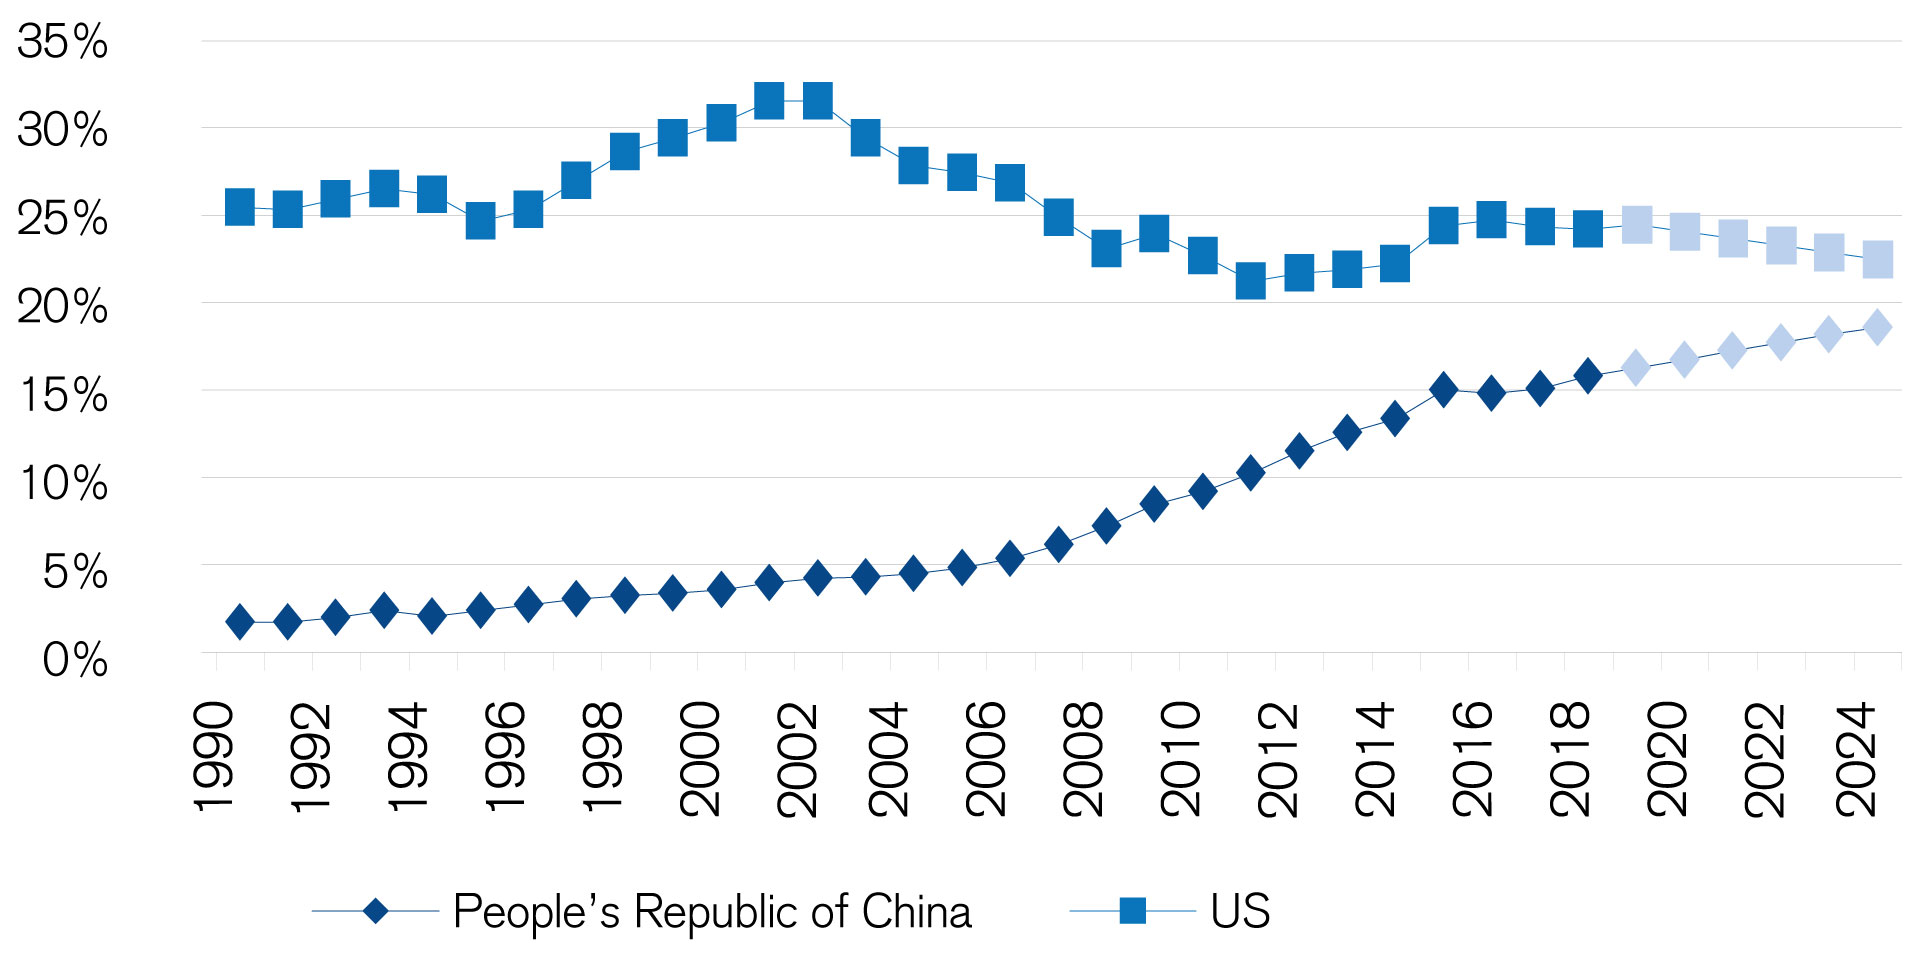 Share of global GDP – US and China